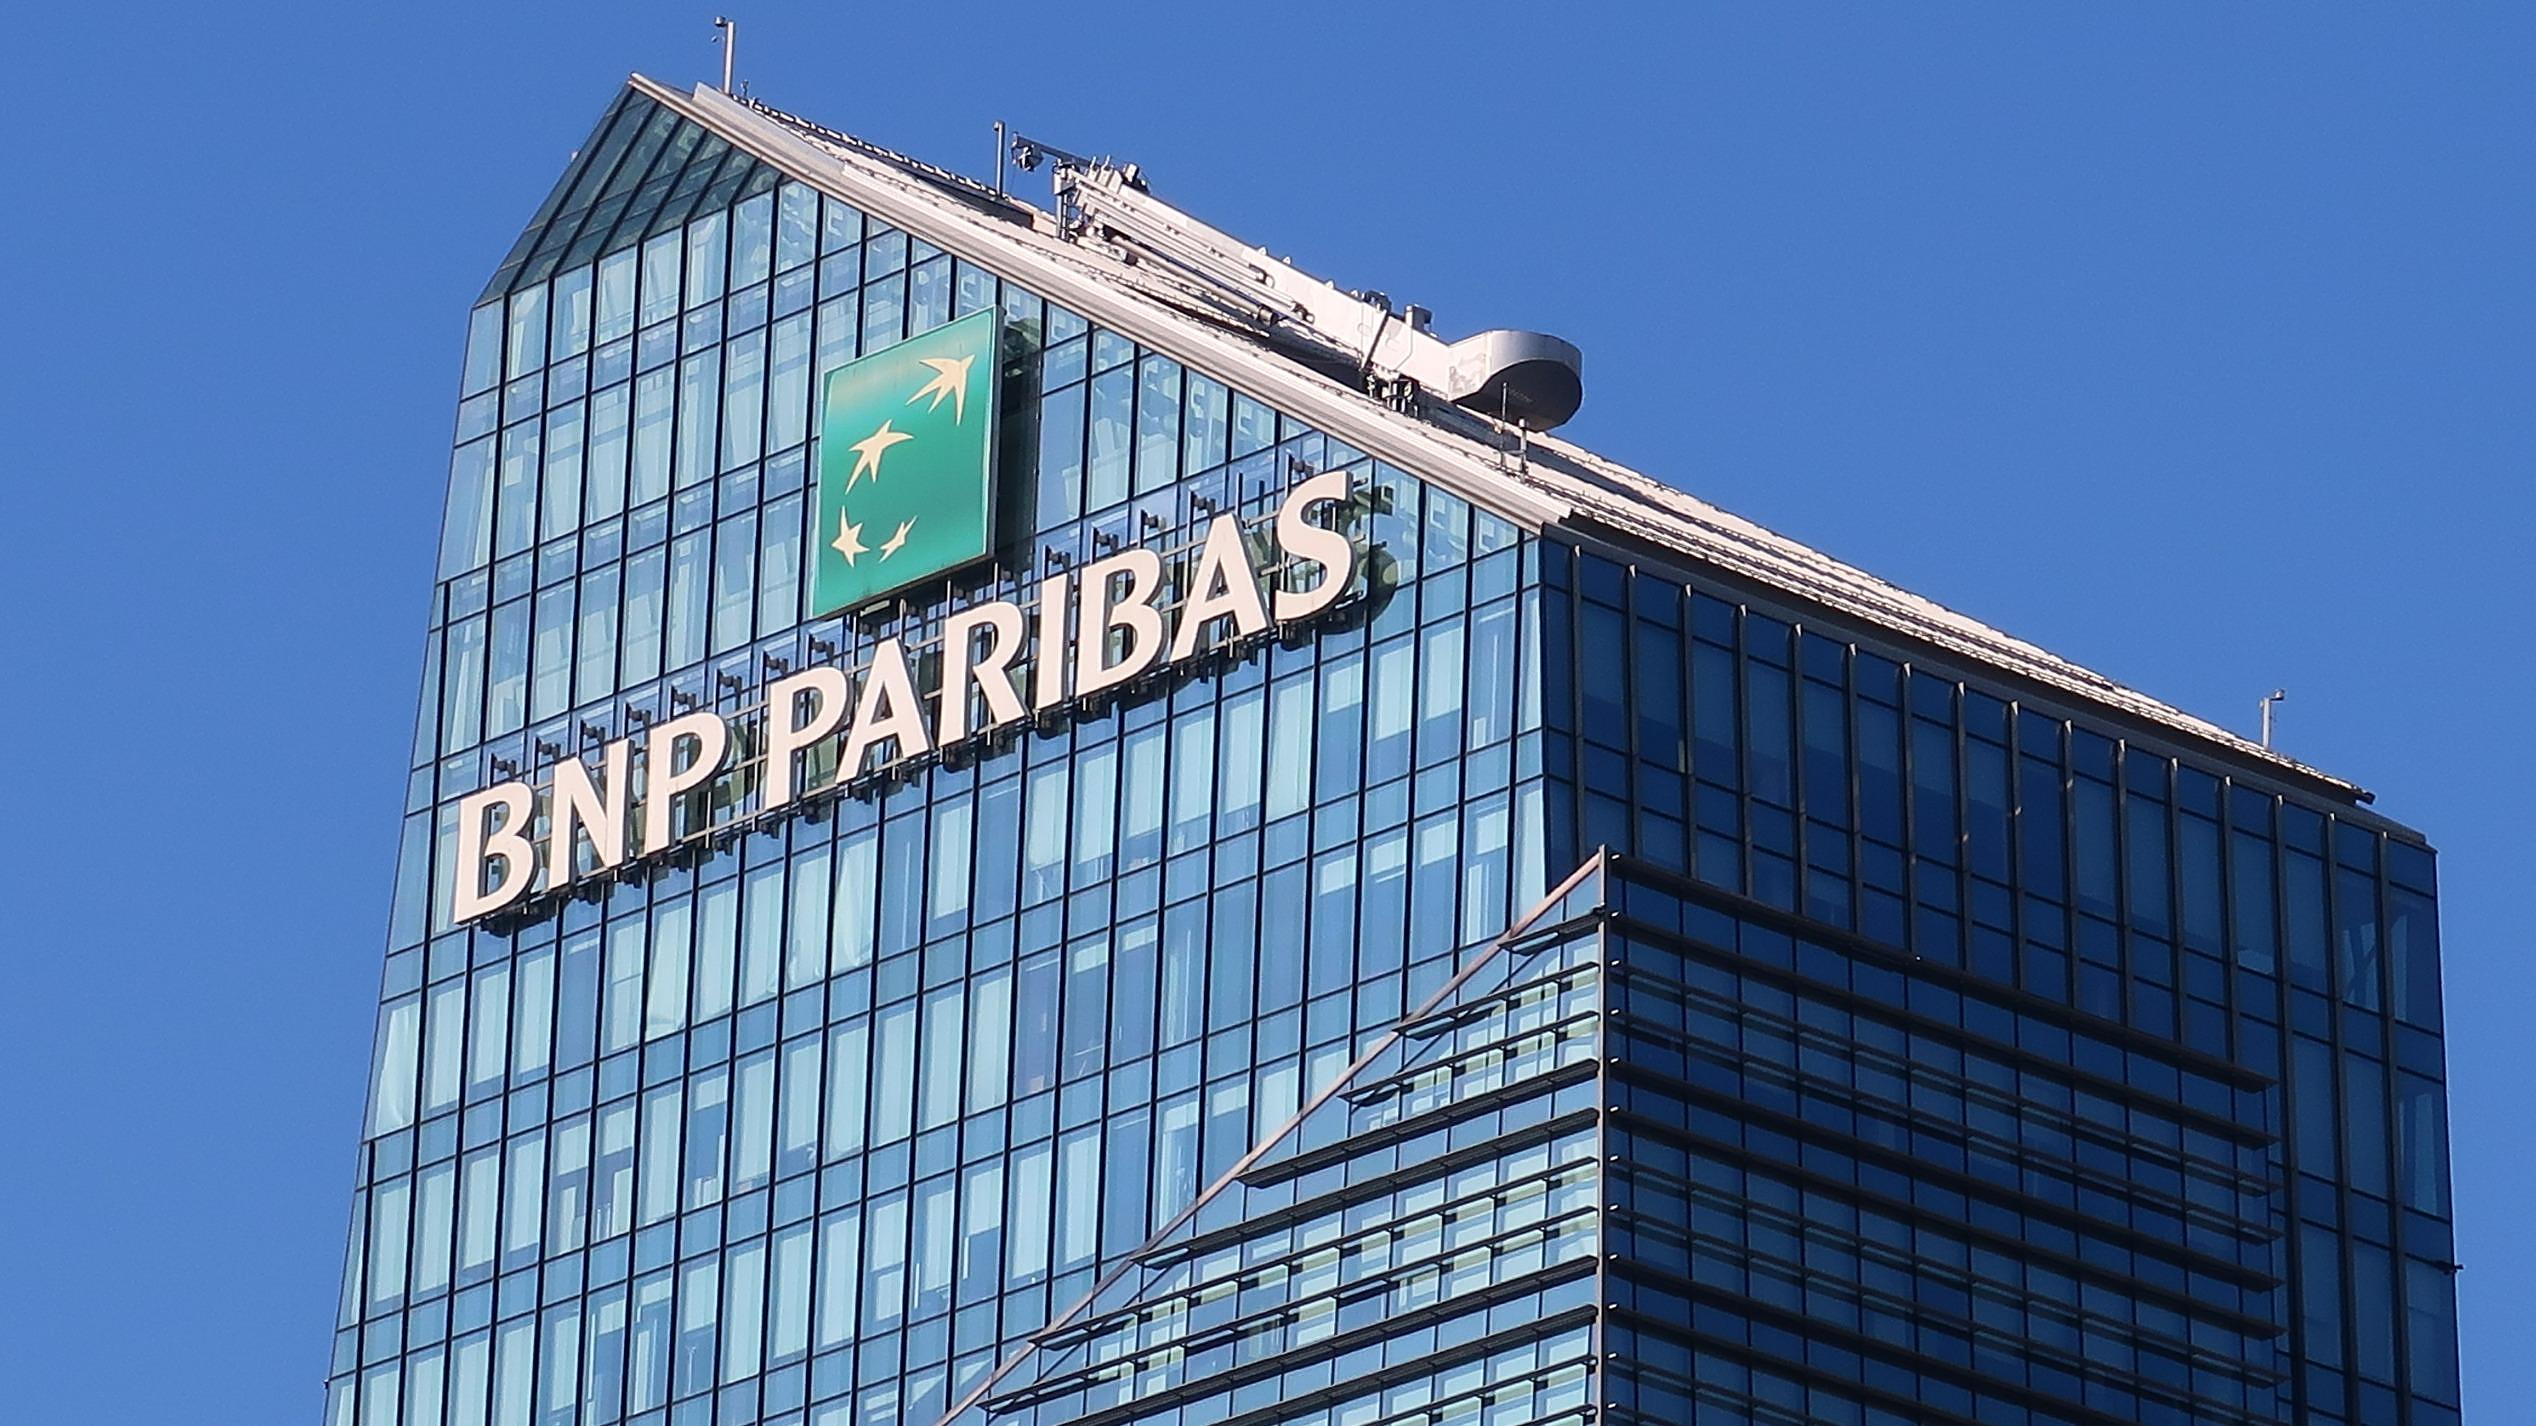 Opening of an investigation into “potentially suspicious” financial flows hosted by a branch of BNP Paribas